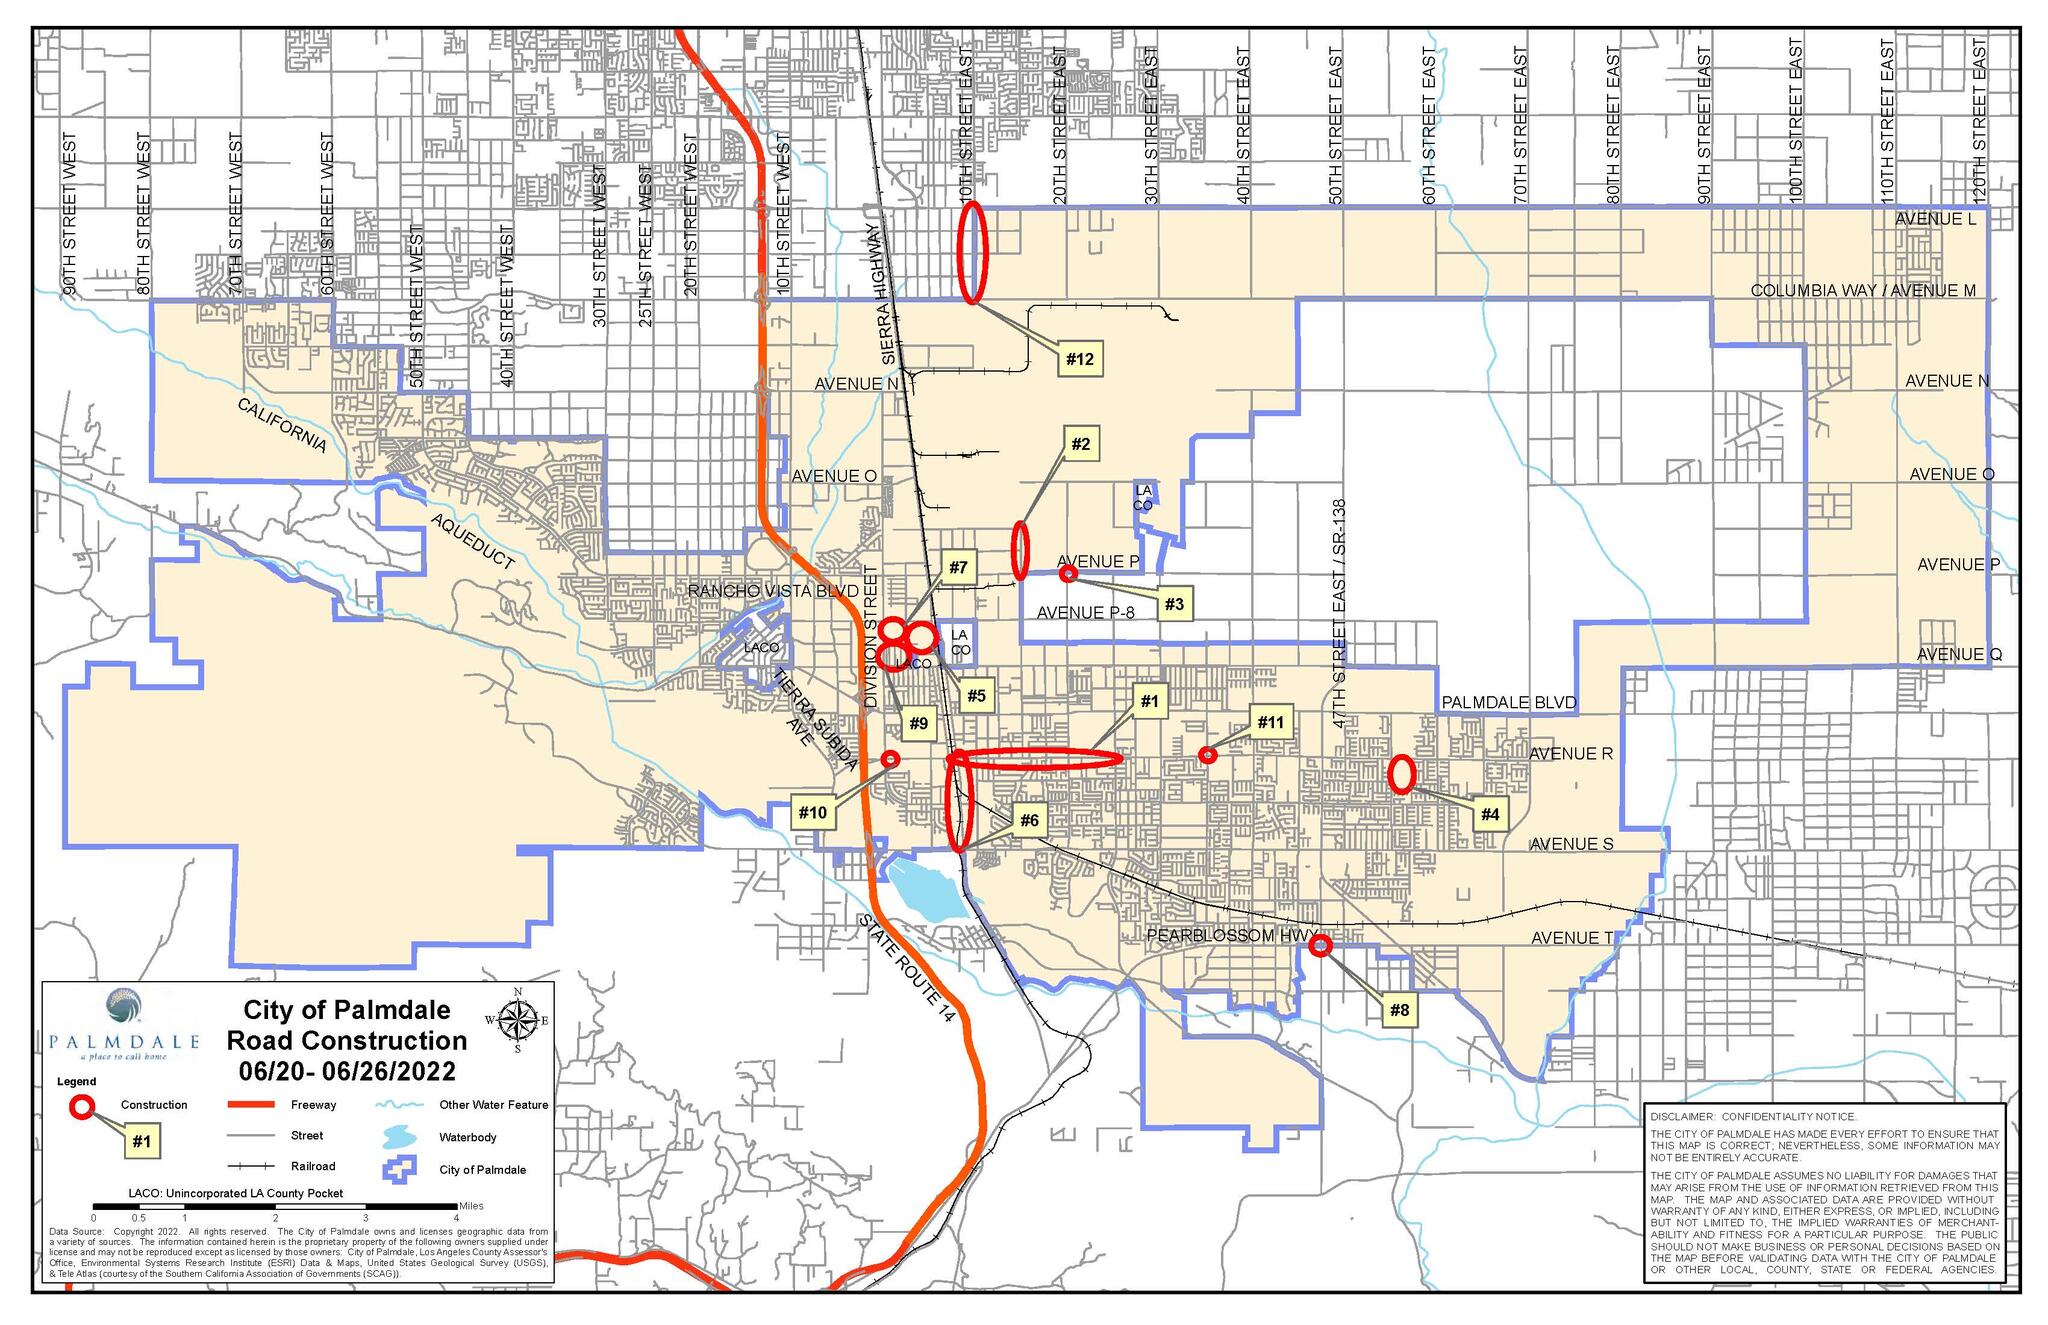 Road Construction update for June 20 - 26, 2022 (City of Palmdale ...